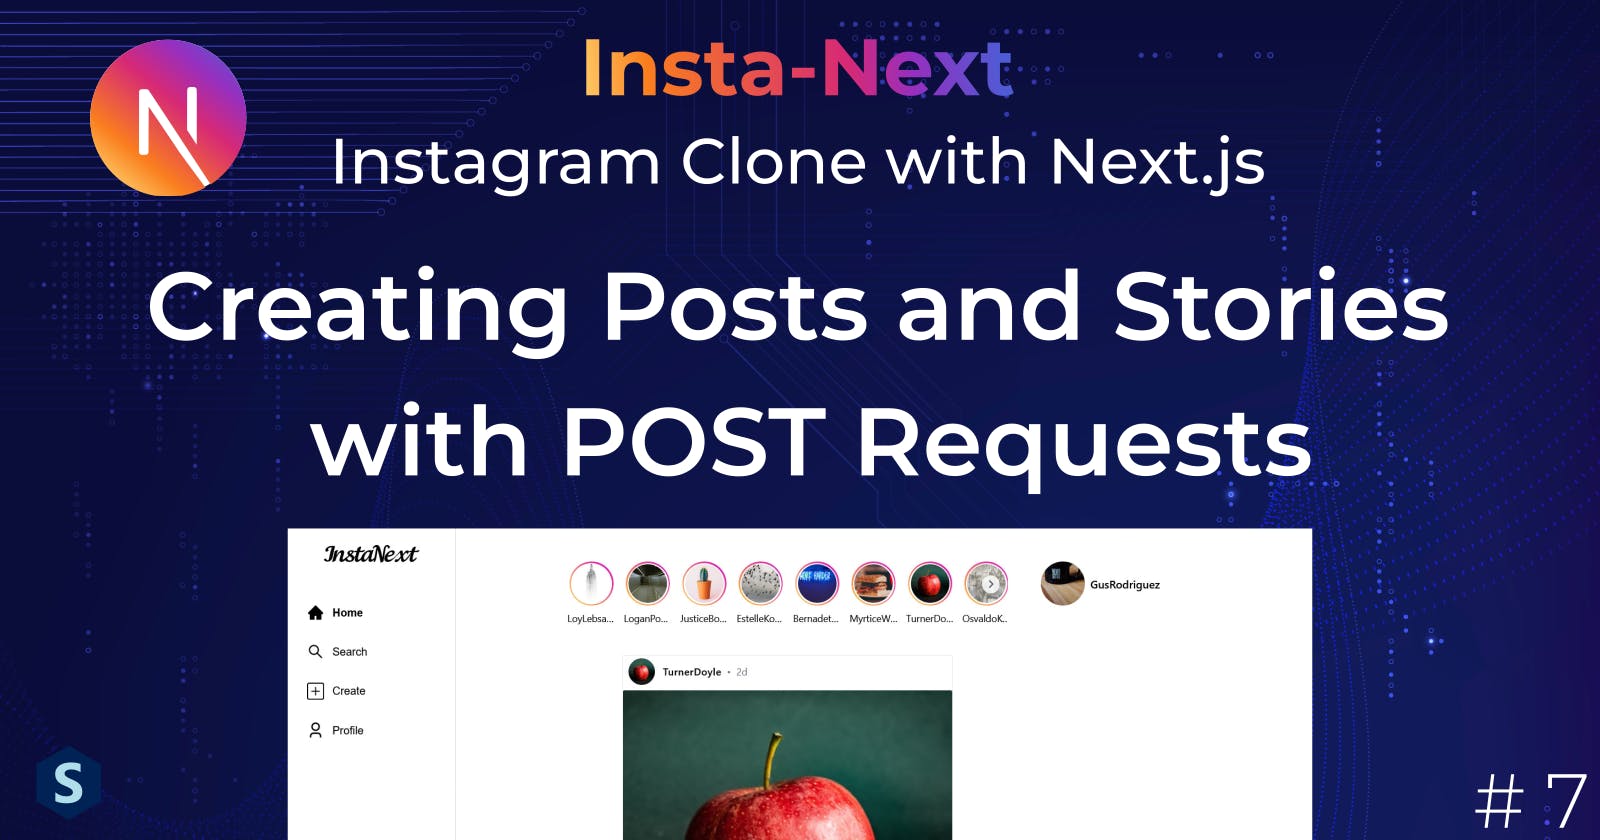 Insta-Next: Creating Posts and Stories with POST Requests